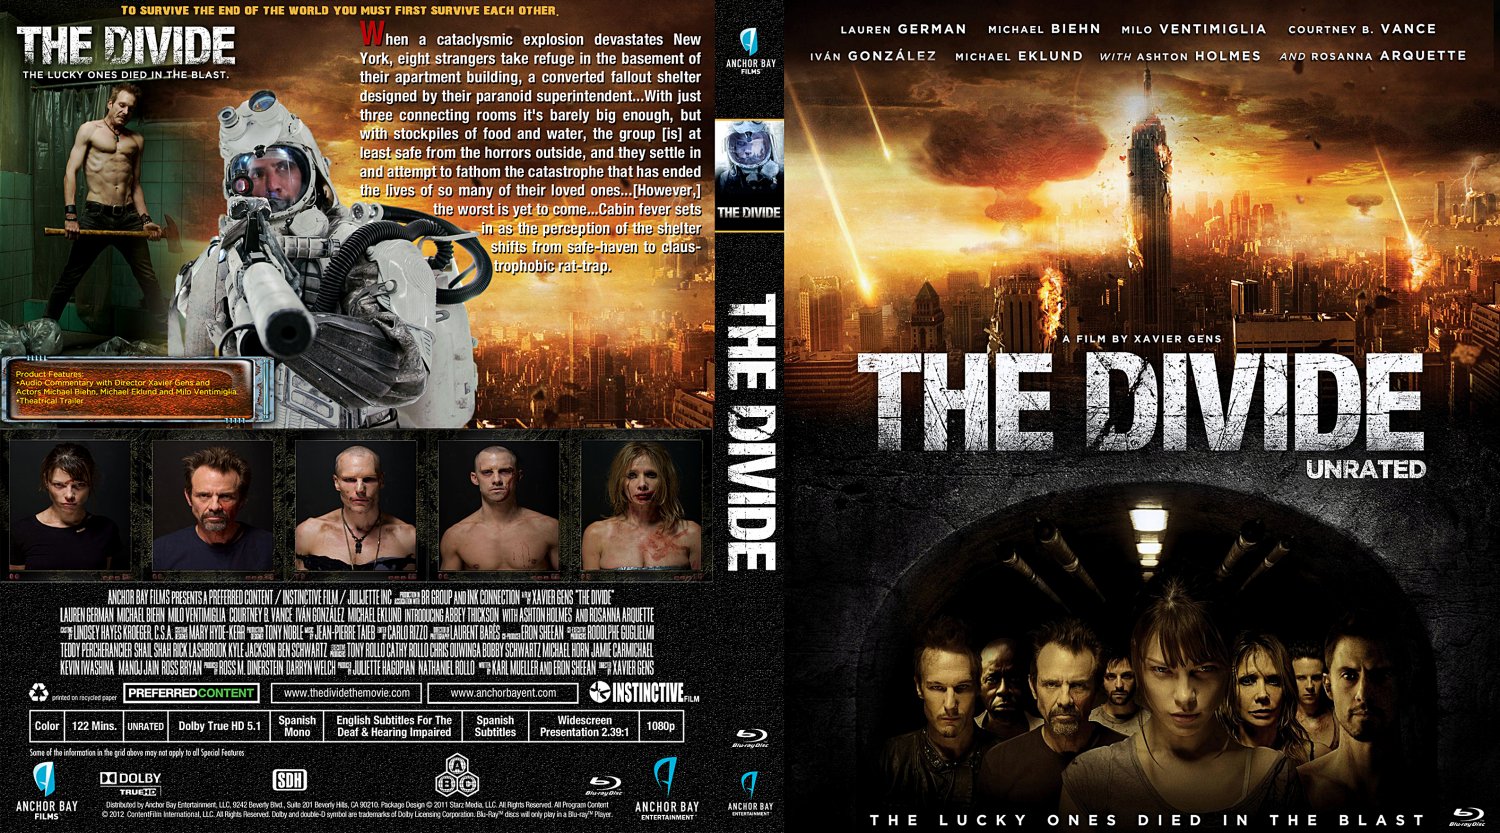 The Divide - Bluray Cover
Keywords: ;media_cover